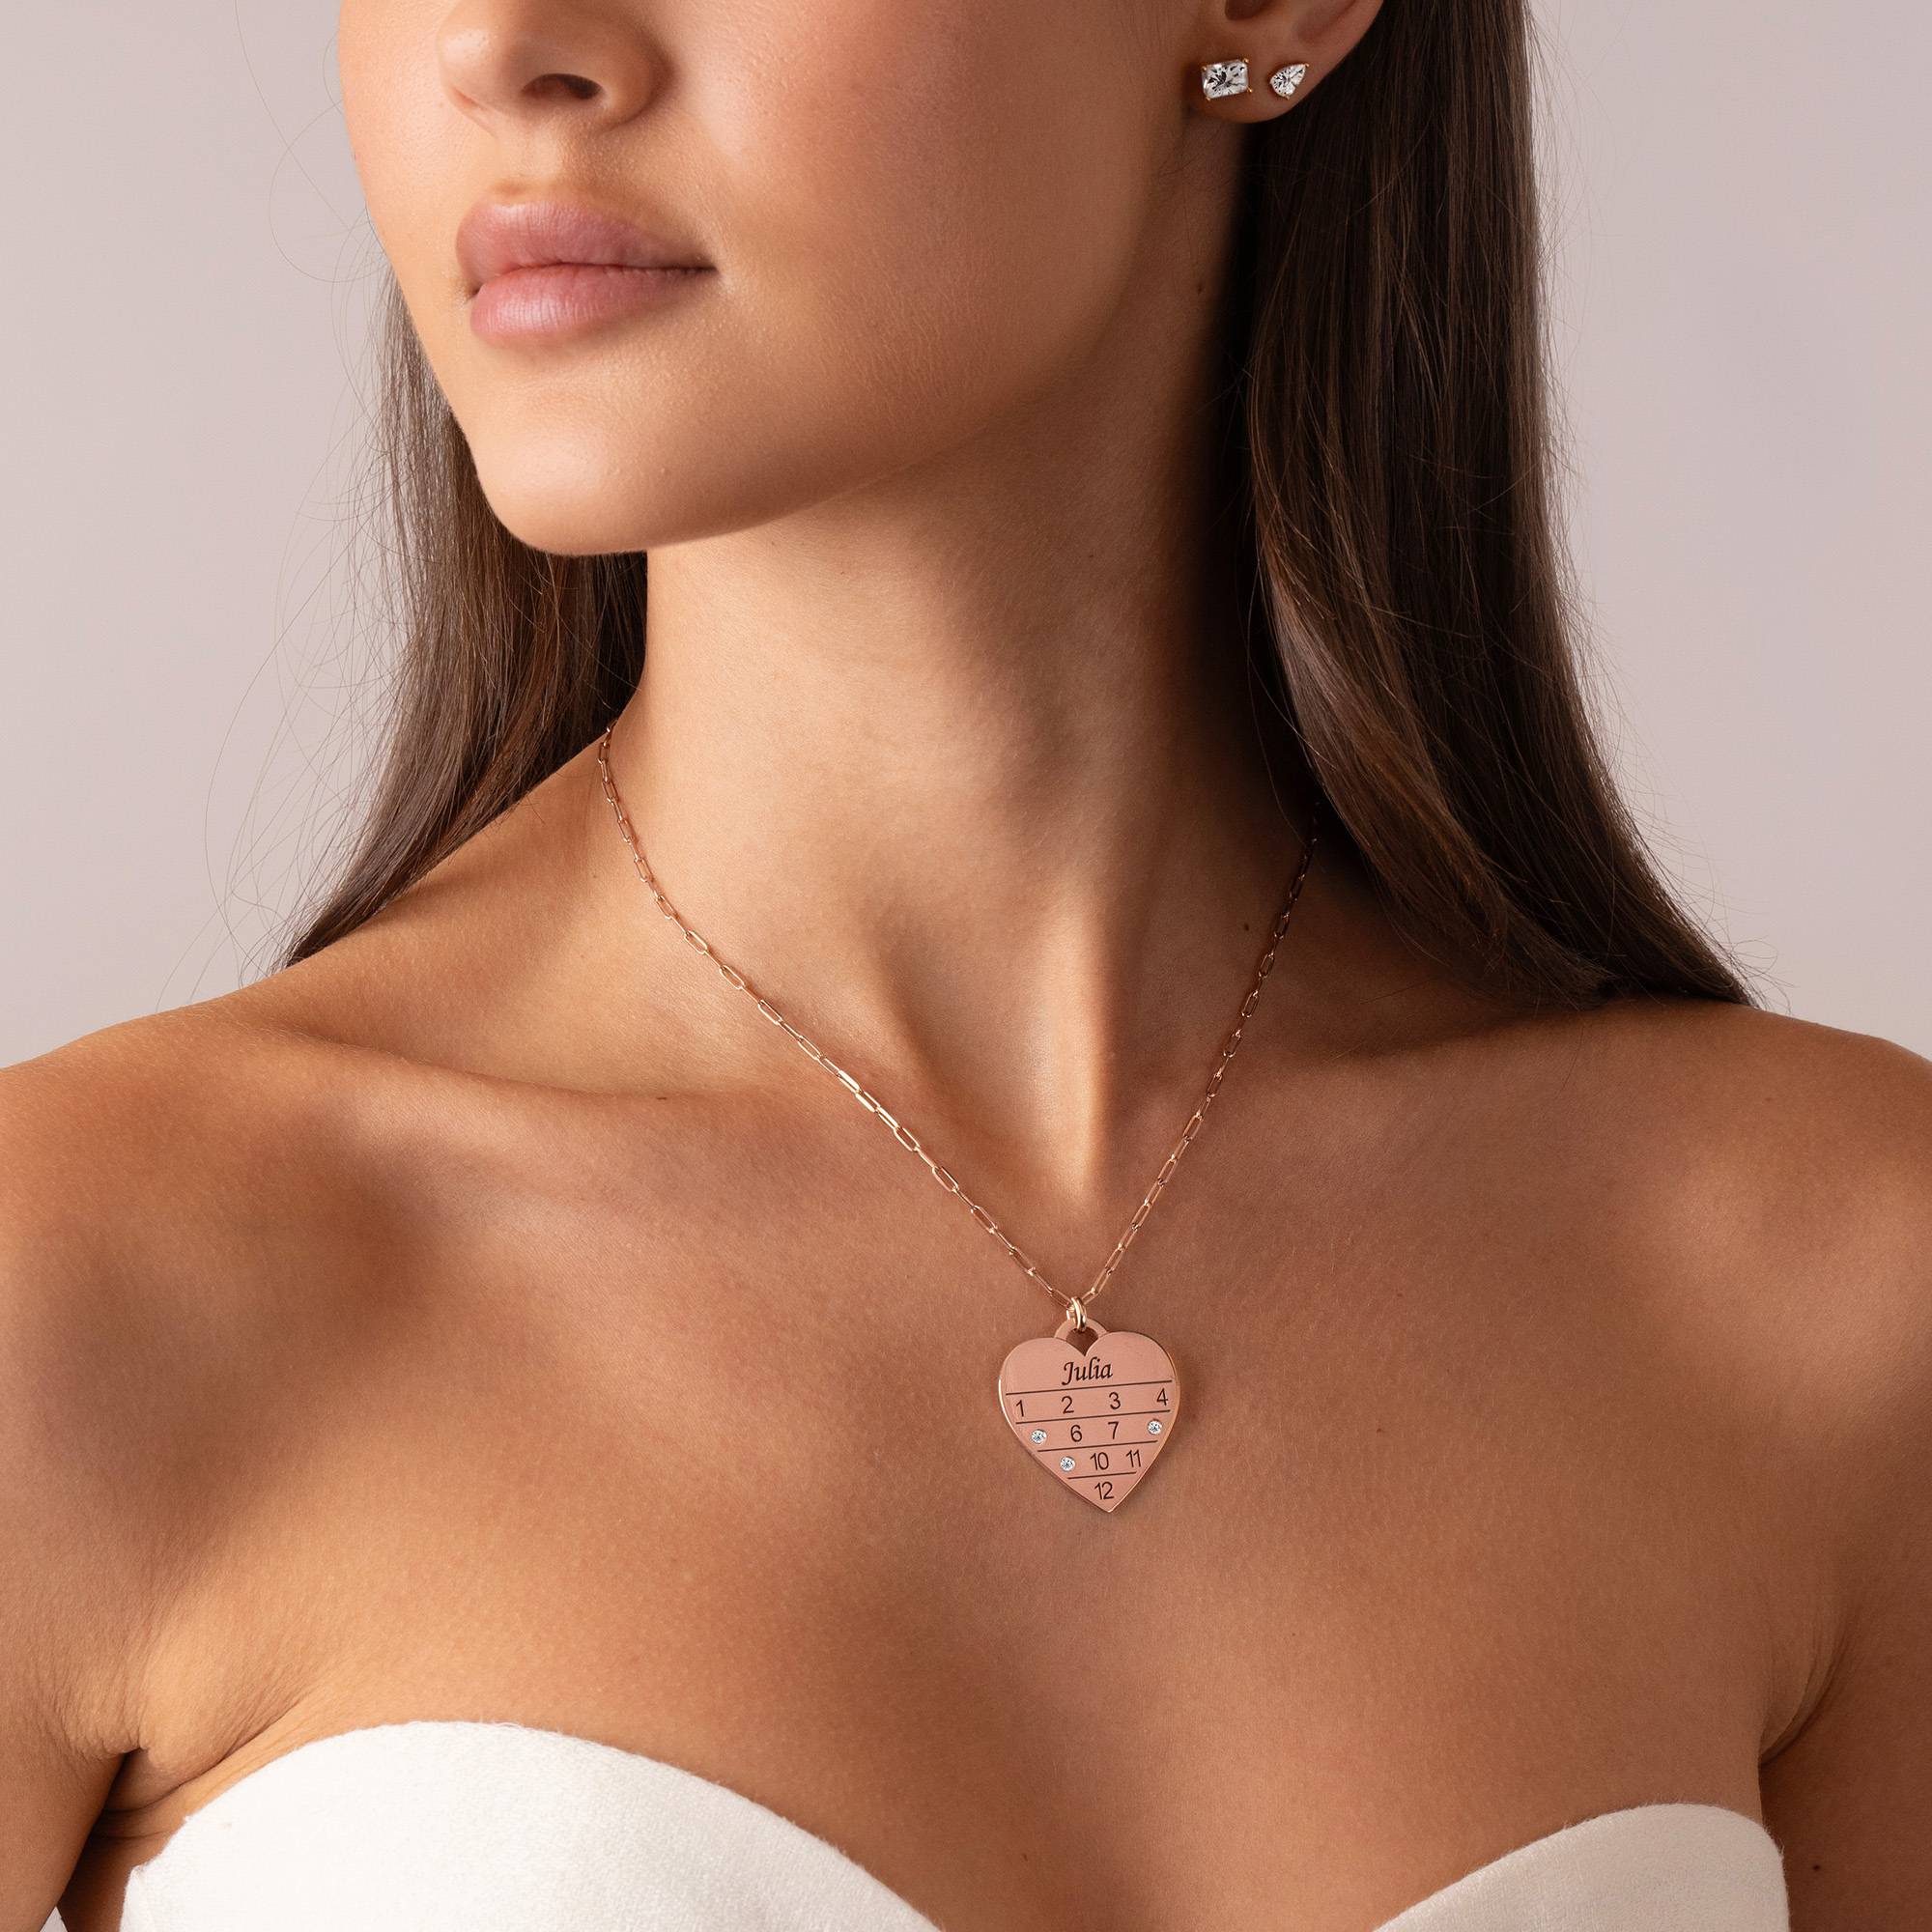 12 Month Calendar Heart Necklace with Diamonds in 18ct Rose Gold Plating-4 product photo